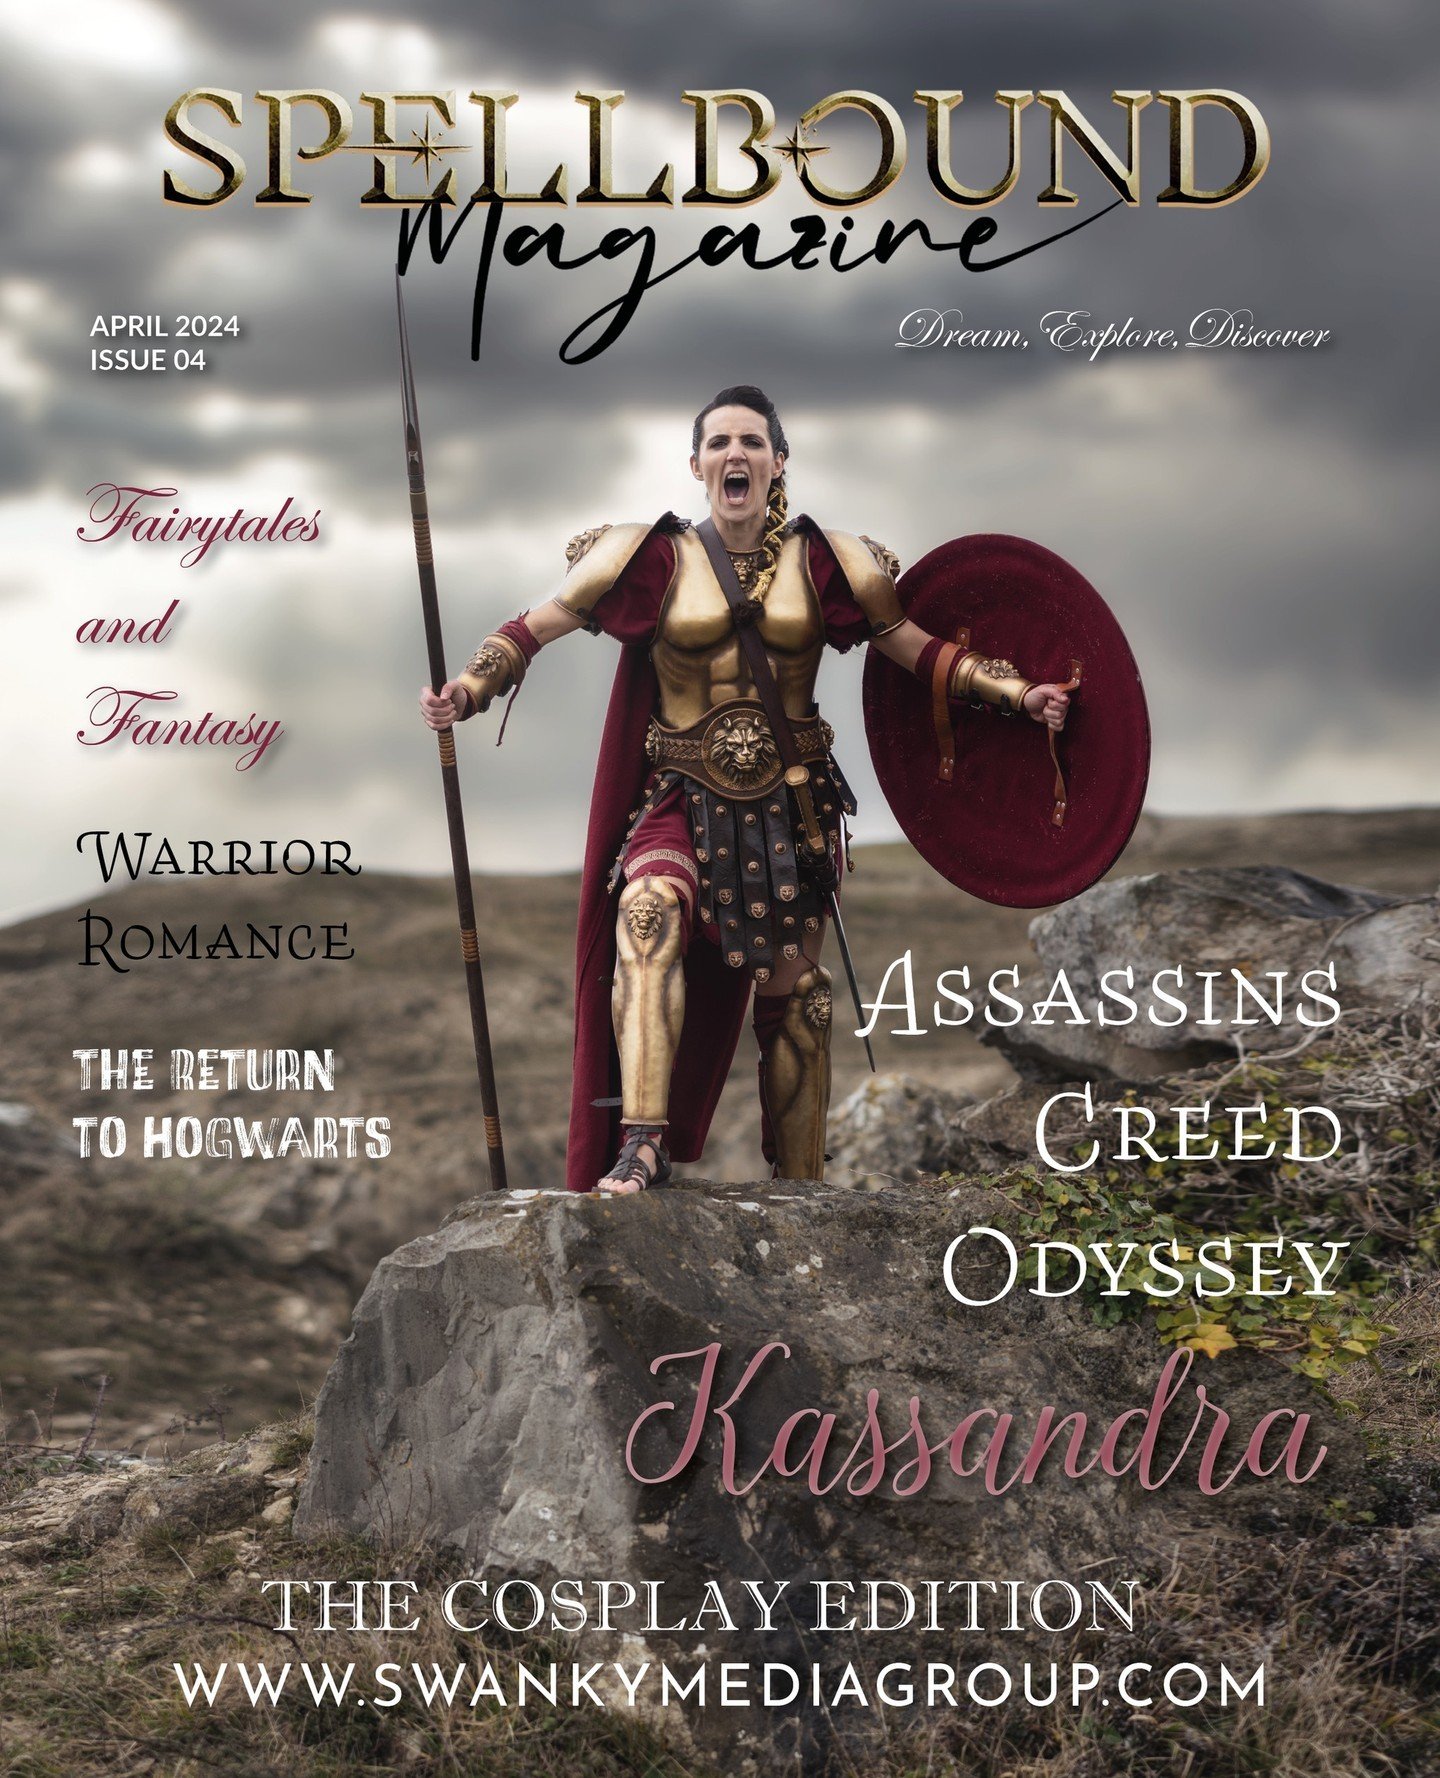 OUR APRIL ISSUES HAVE NOW ARRIVED! ❤⁠
⁠
Spellbound Fairytales and Fantasy Magazine - April 2024: The Cosplay Edition Issue 4⁠
⁠
👆🏻 Grab your copy via the link in our bio⁠, by heading to swankygroupworldwide.shop!⁠
⁠⁠⁠
Use &amp; Follow #spellboundma